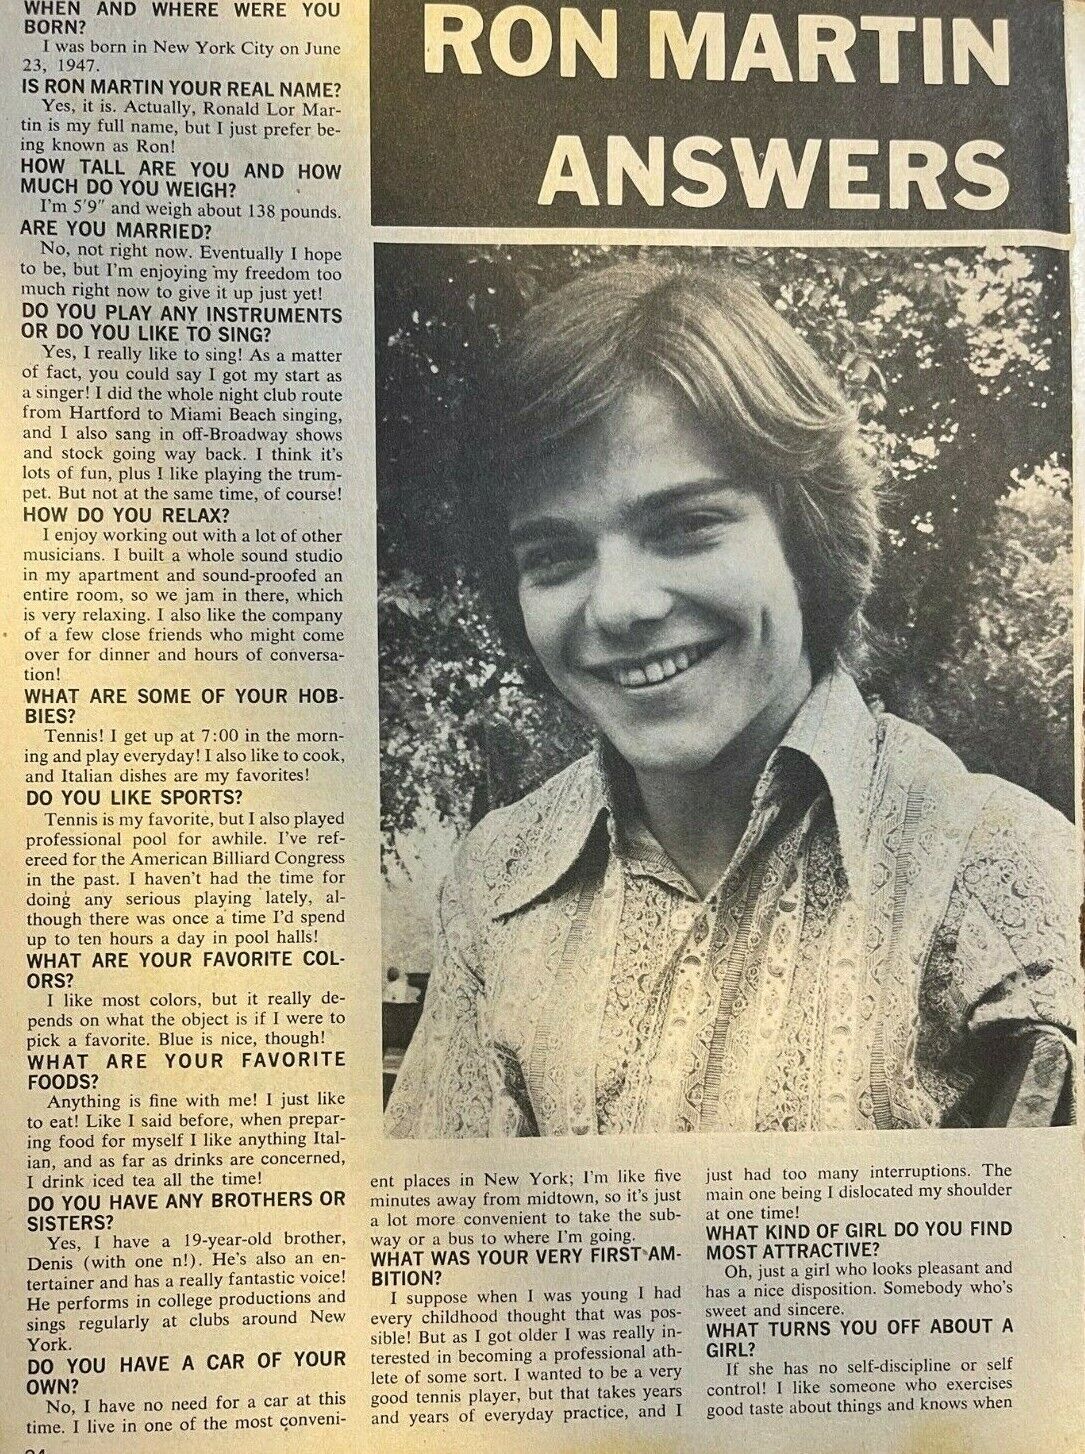 1971 Actor Ron Martin Answers Your Questions